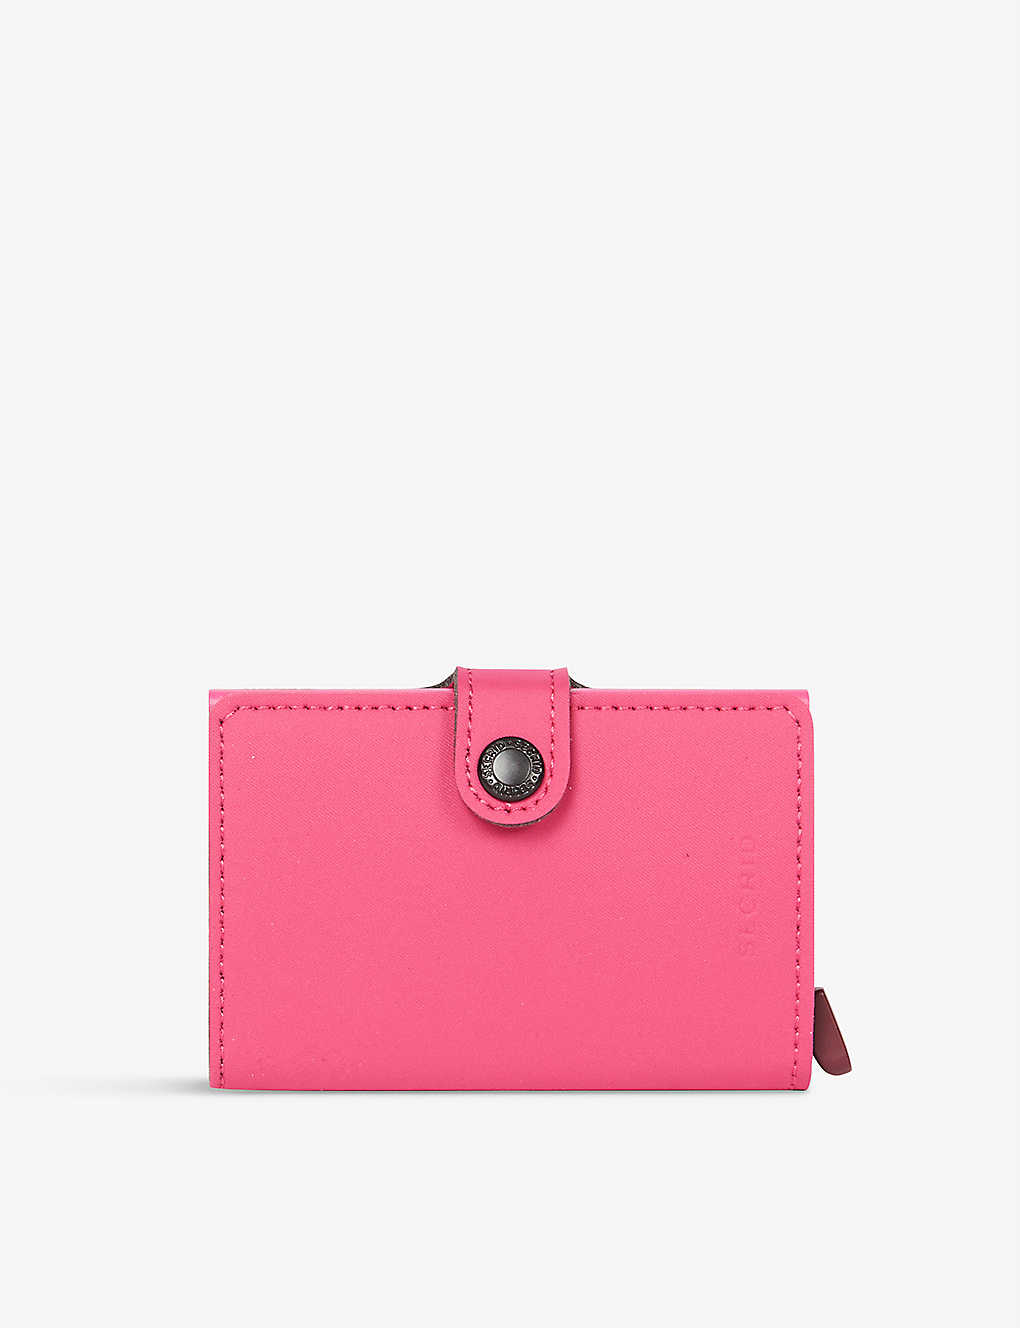 Secrid Miniwallet Faux-leather And Metal Cardholder In Fuchsia